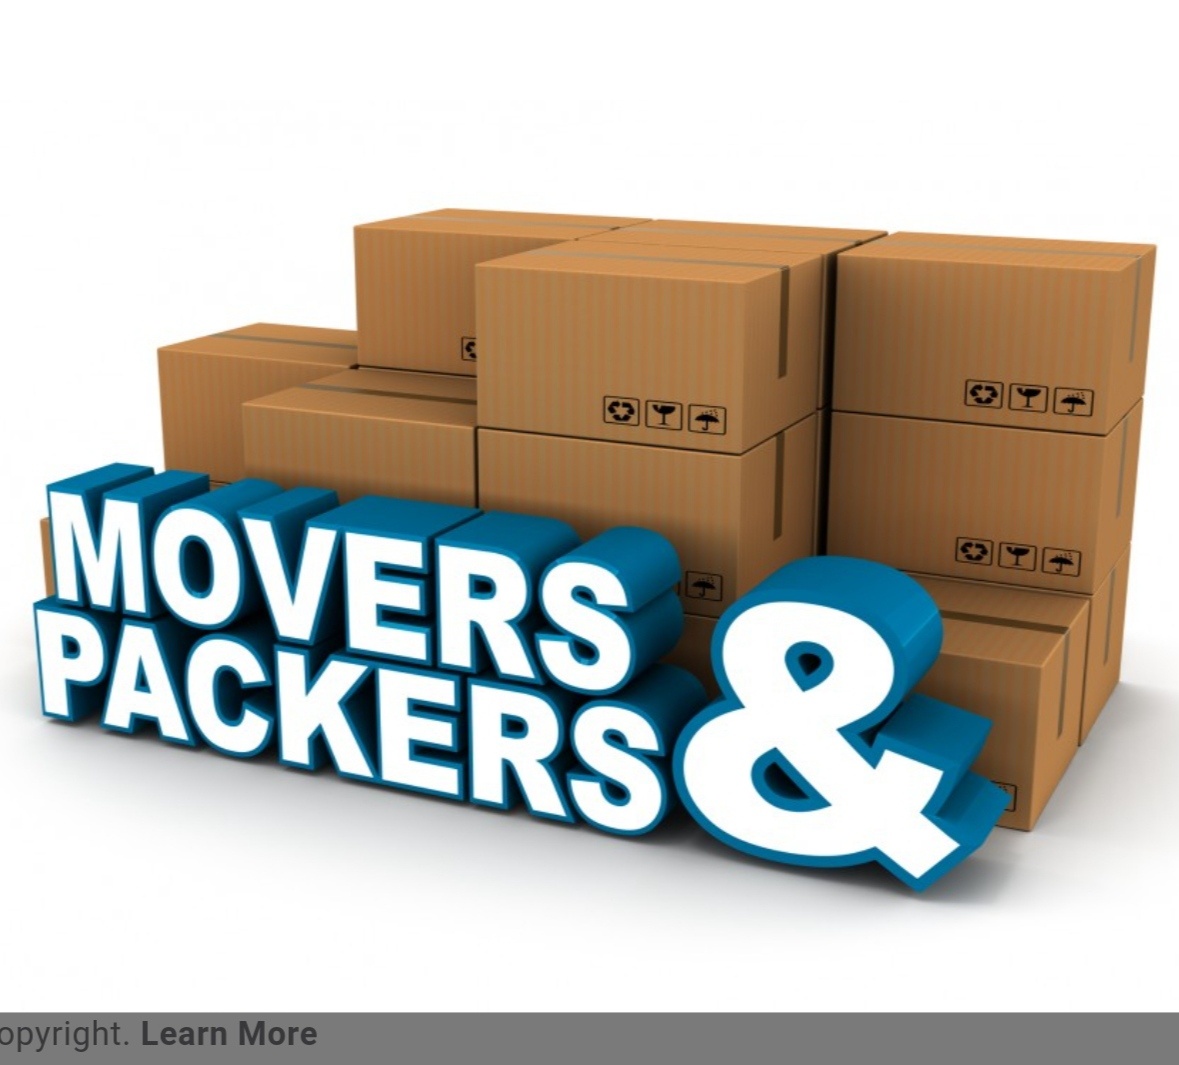 Movers/ Packers; Exp: Some experience (0-1 years)